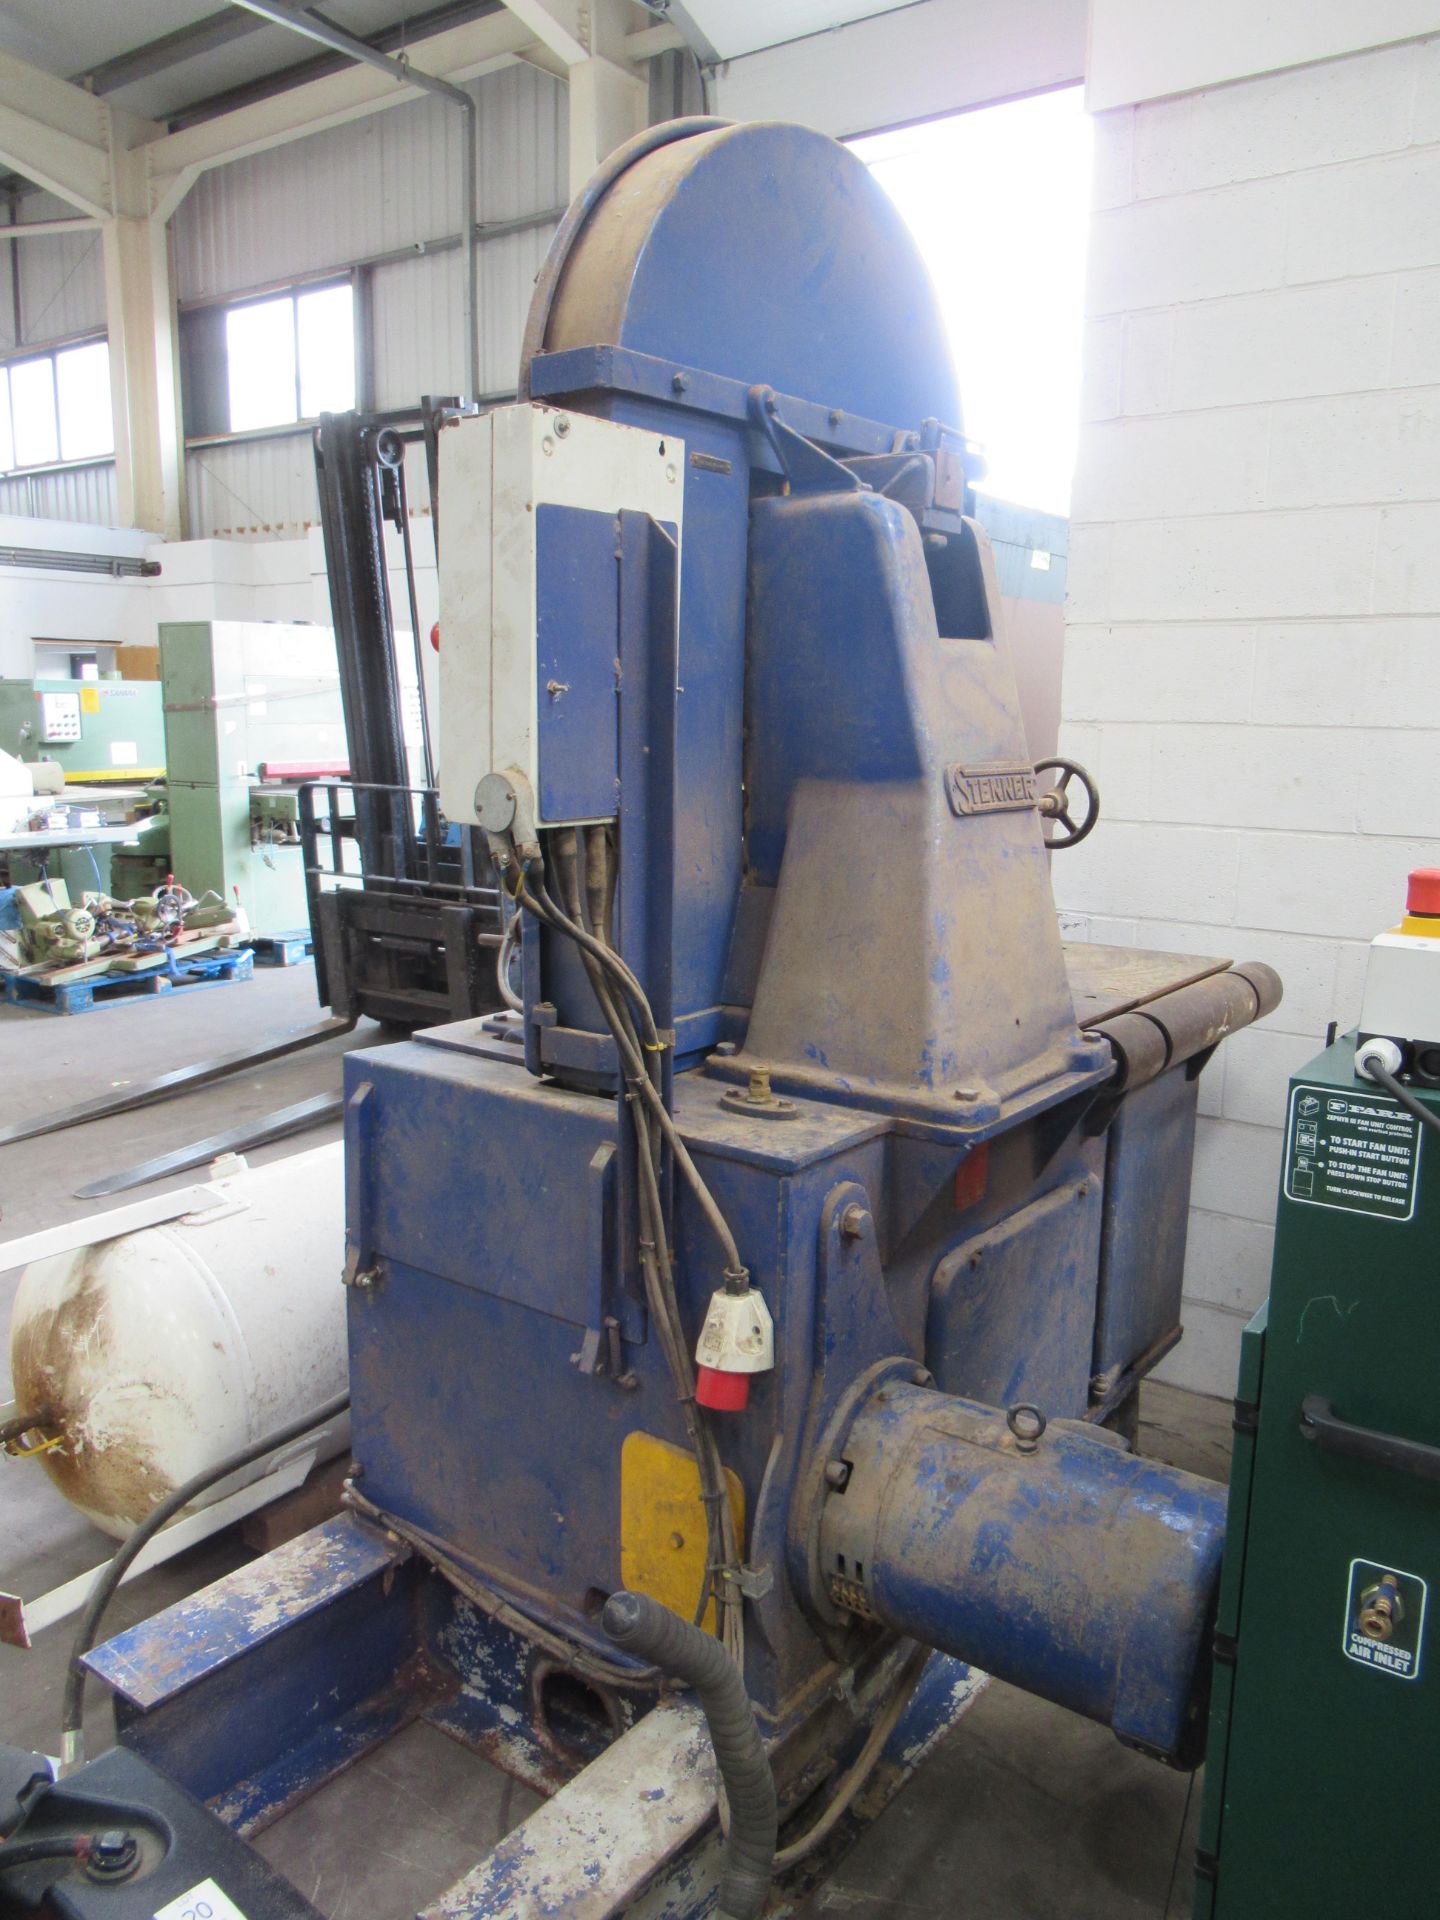 Stenner 36" ReSaw 3PH. Please note there is a £30 plus VAT Lift Out Fee on this lot - Image 6 of 6